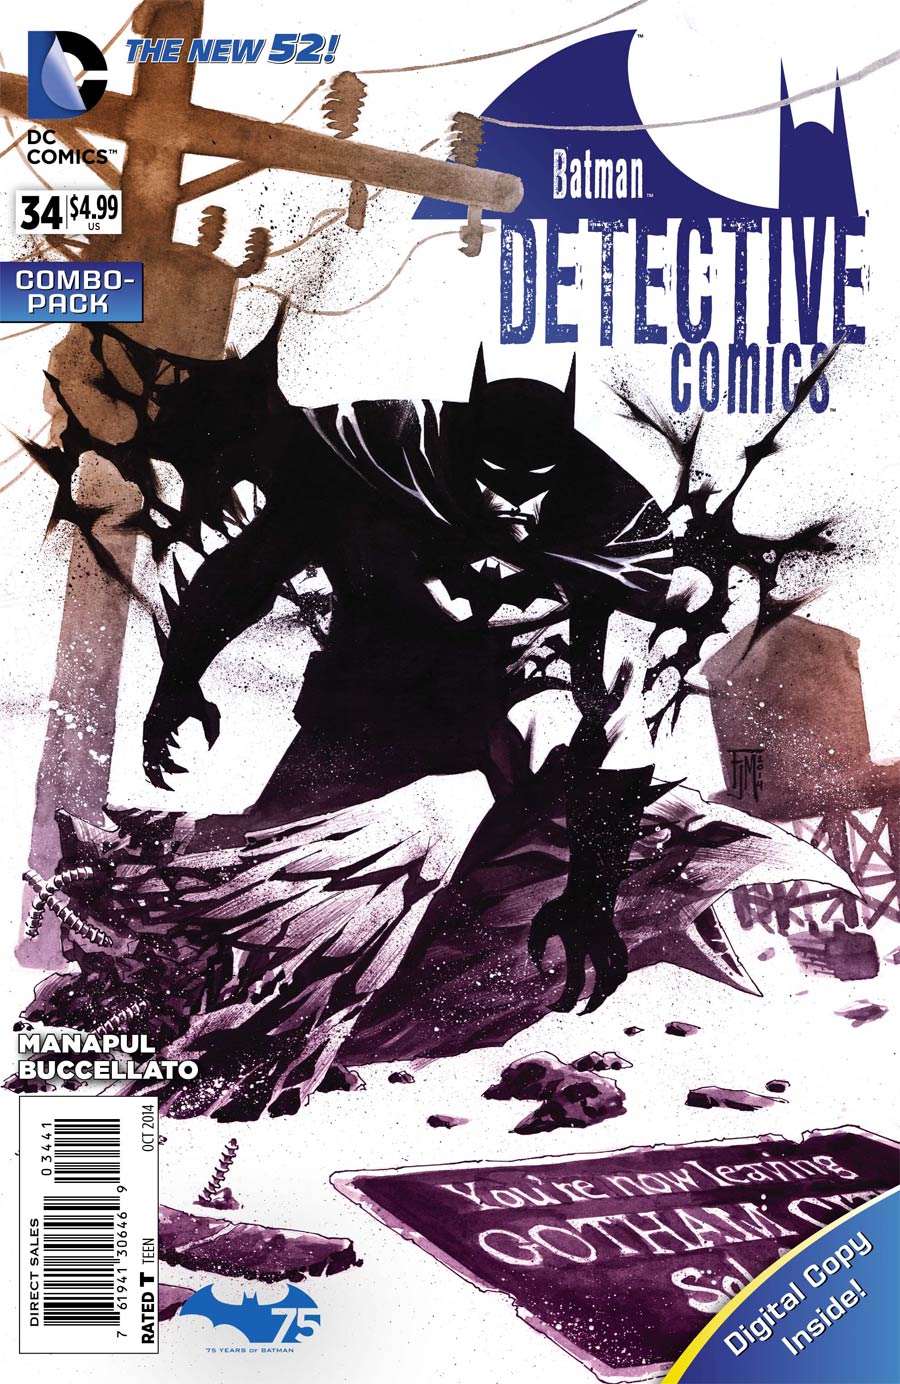 Detective Comics Vol 2 #34 Cover C Combo Pack With Polybag